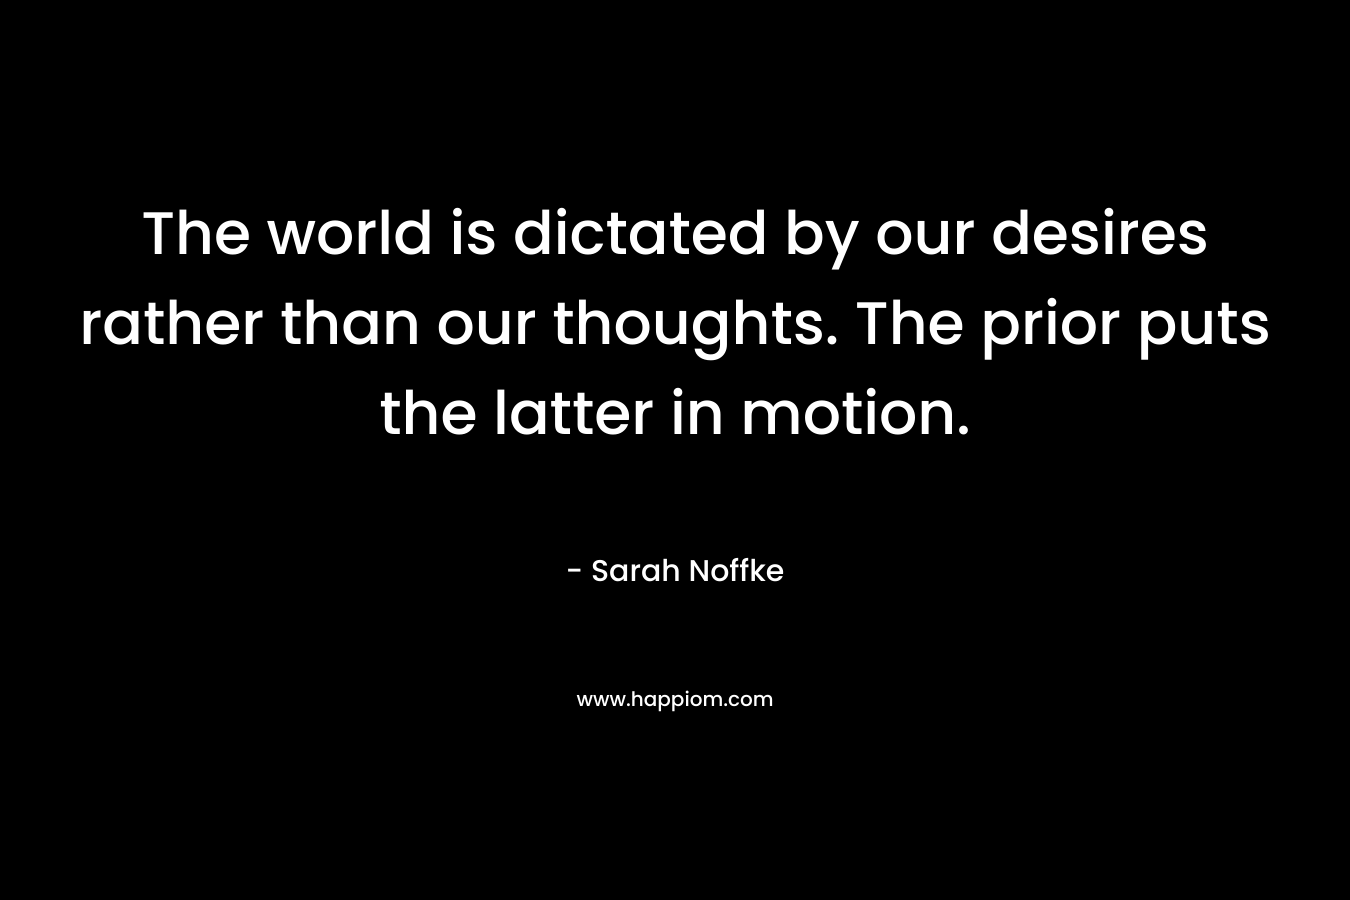 The world is dictated by our desires rather than our thoughts. The prior puts the latter in motion. – Sarah Noffke